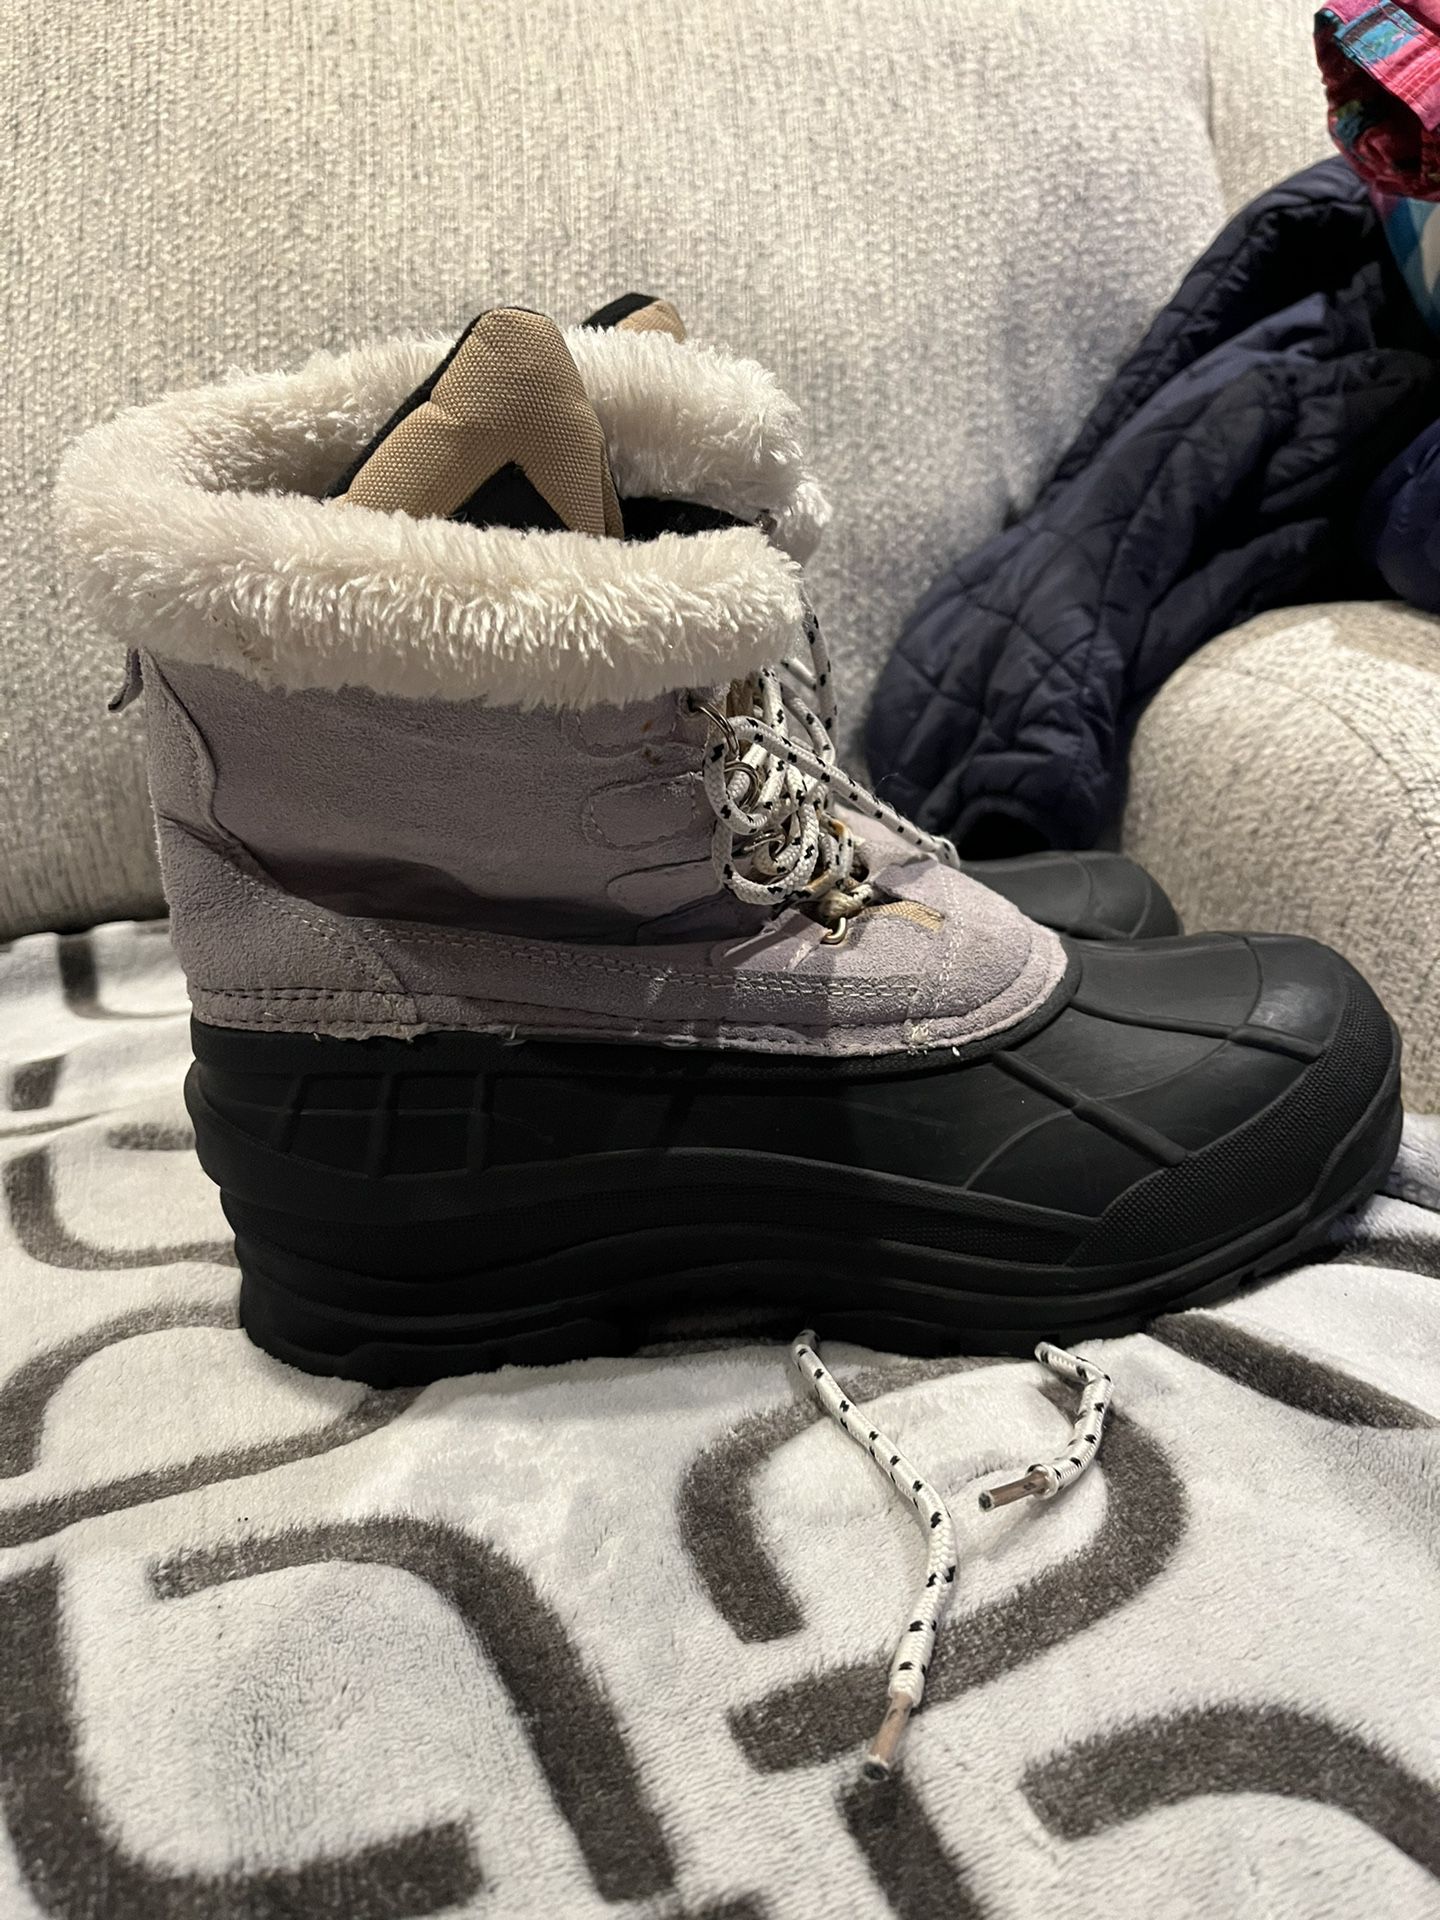 Womens Snow Boots Size 10